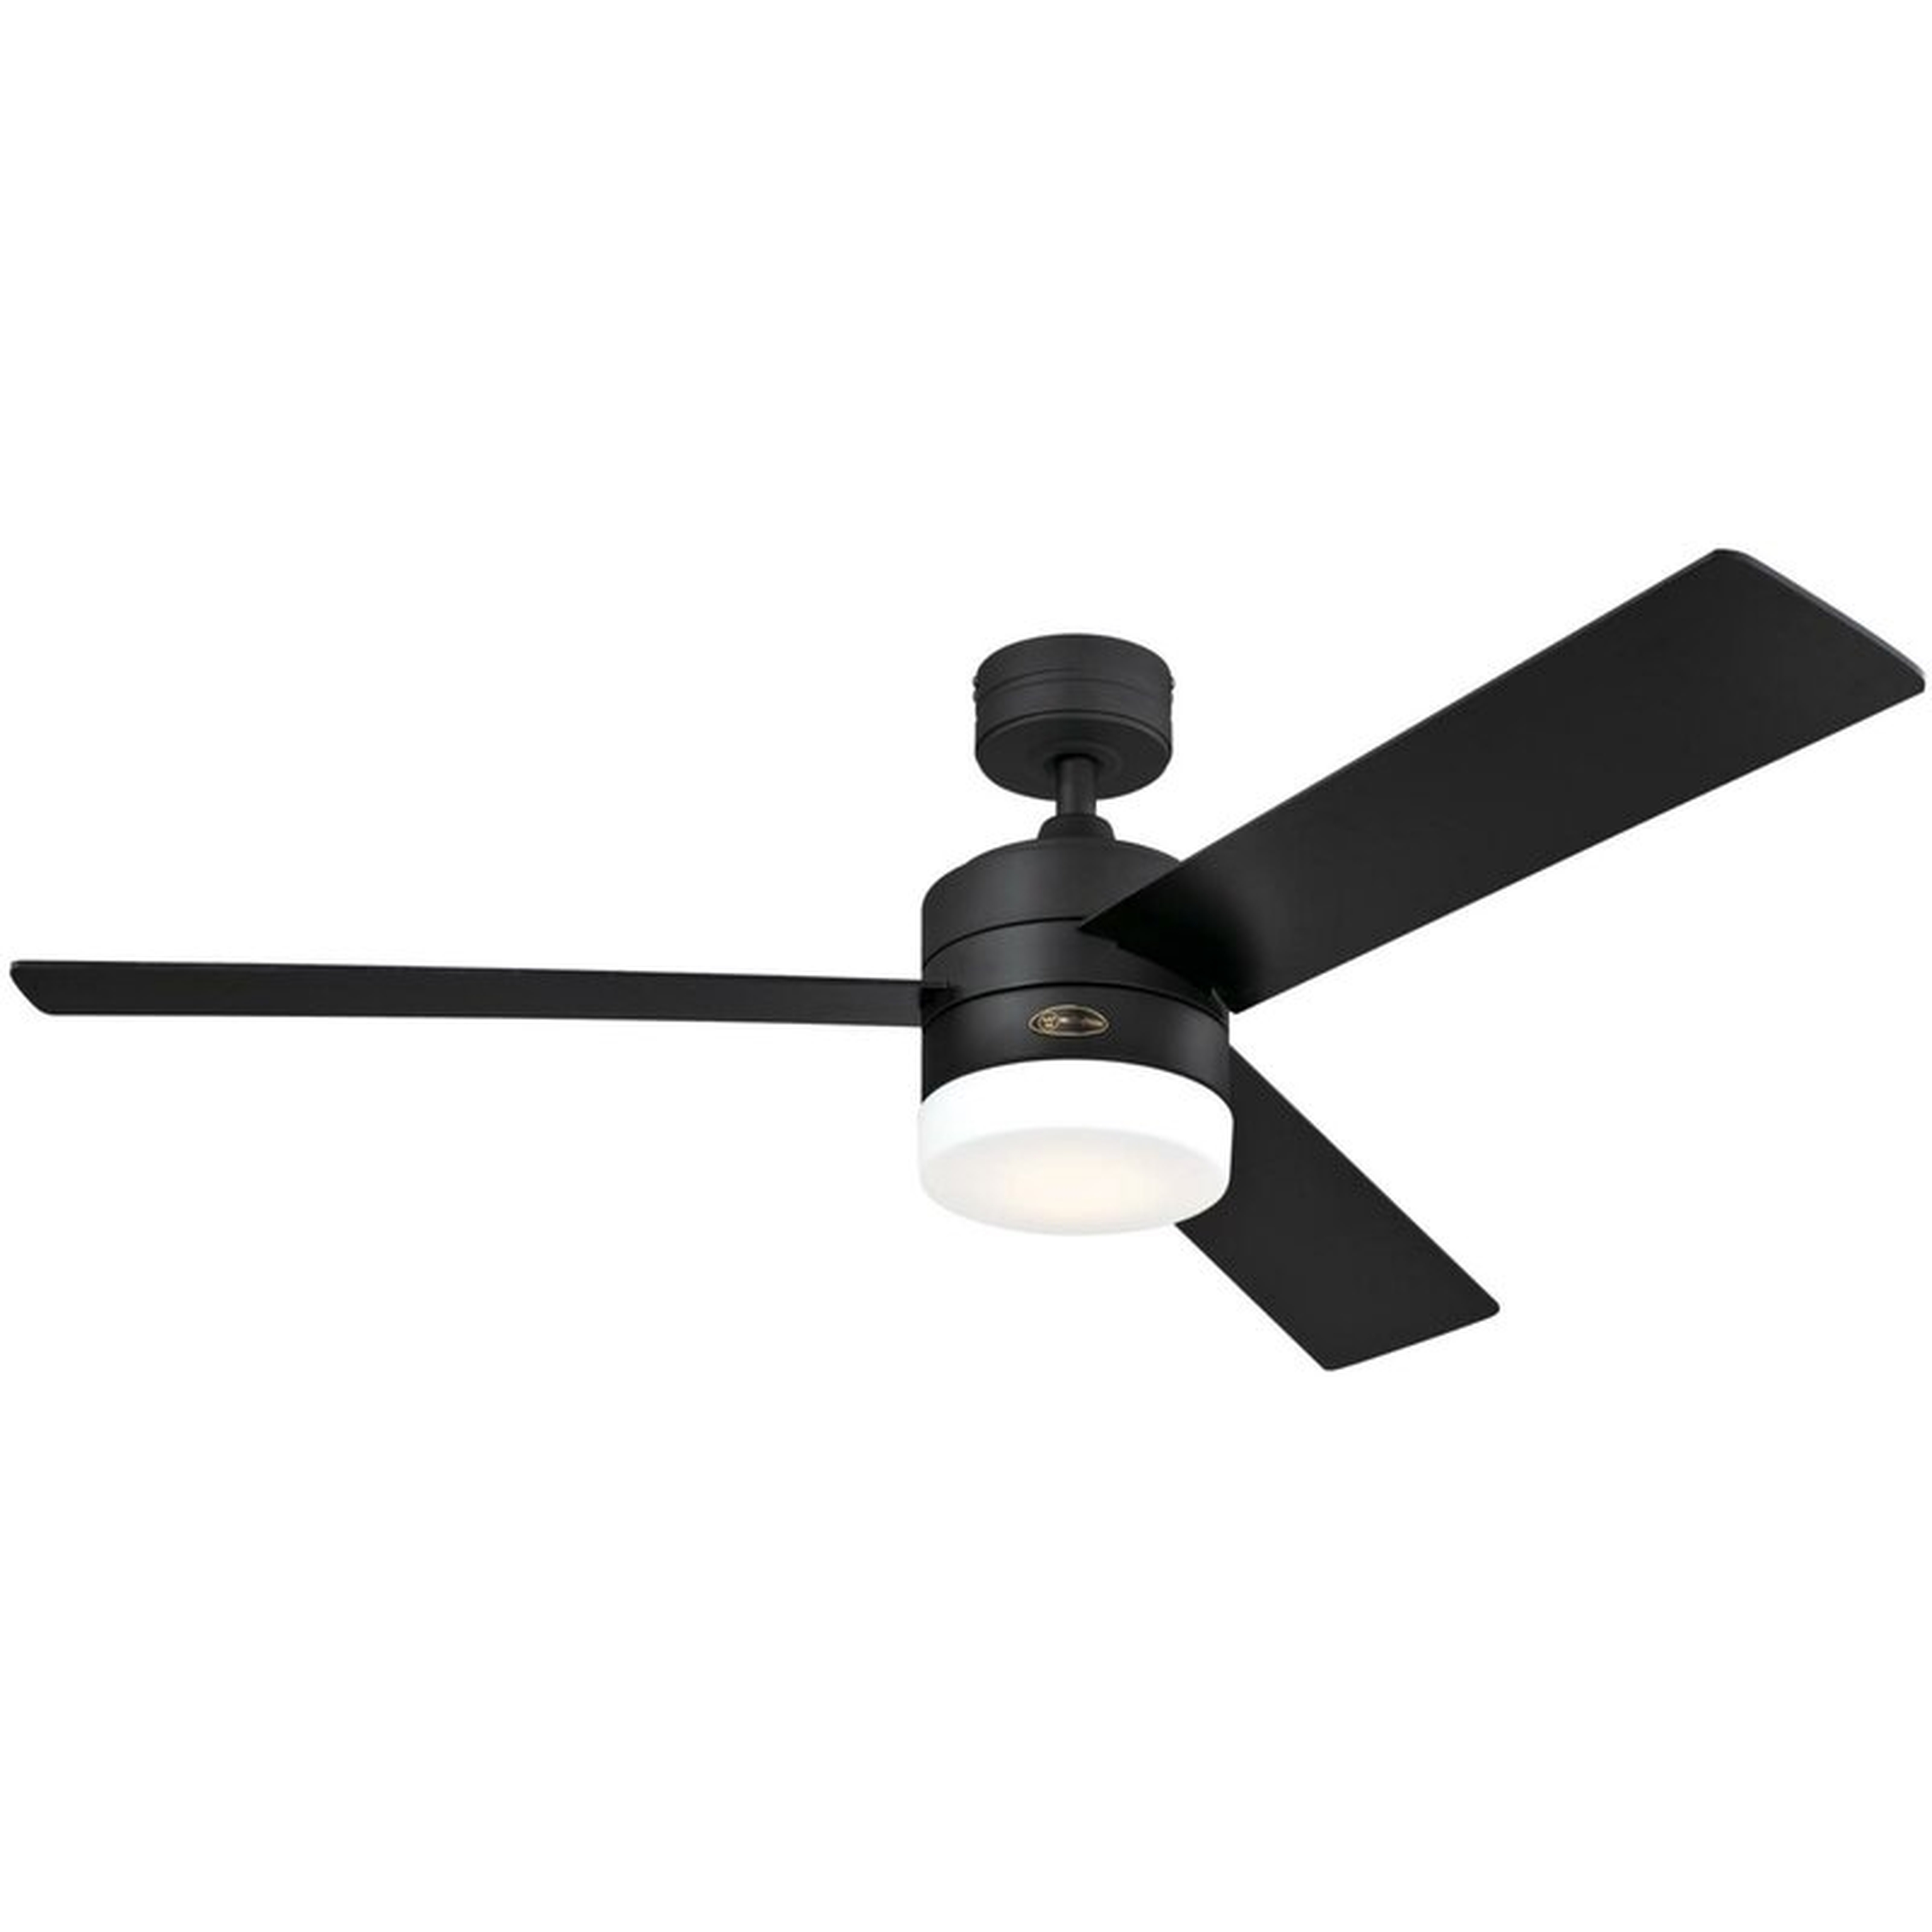 52" Franchek 3 - Blade LED Propeller Ceiling Fan with Remote Control and Light Kit Included - Wayfair